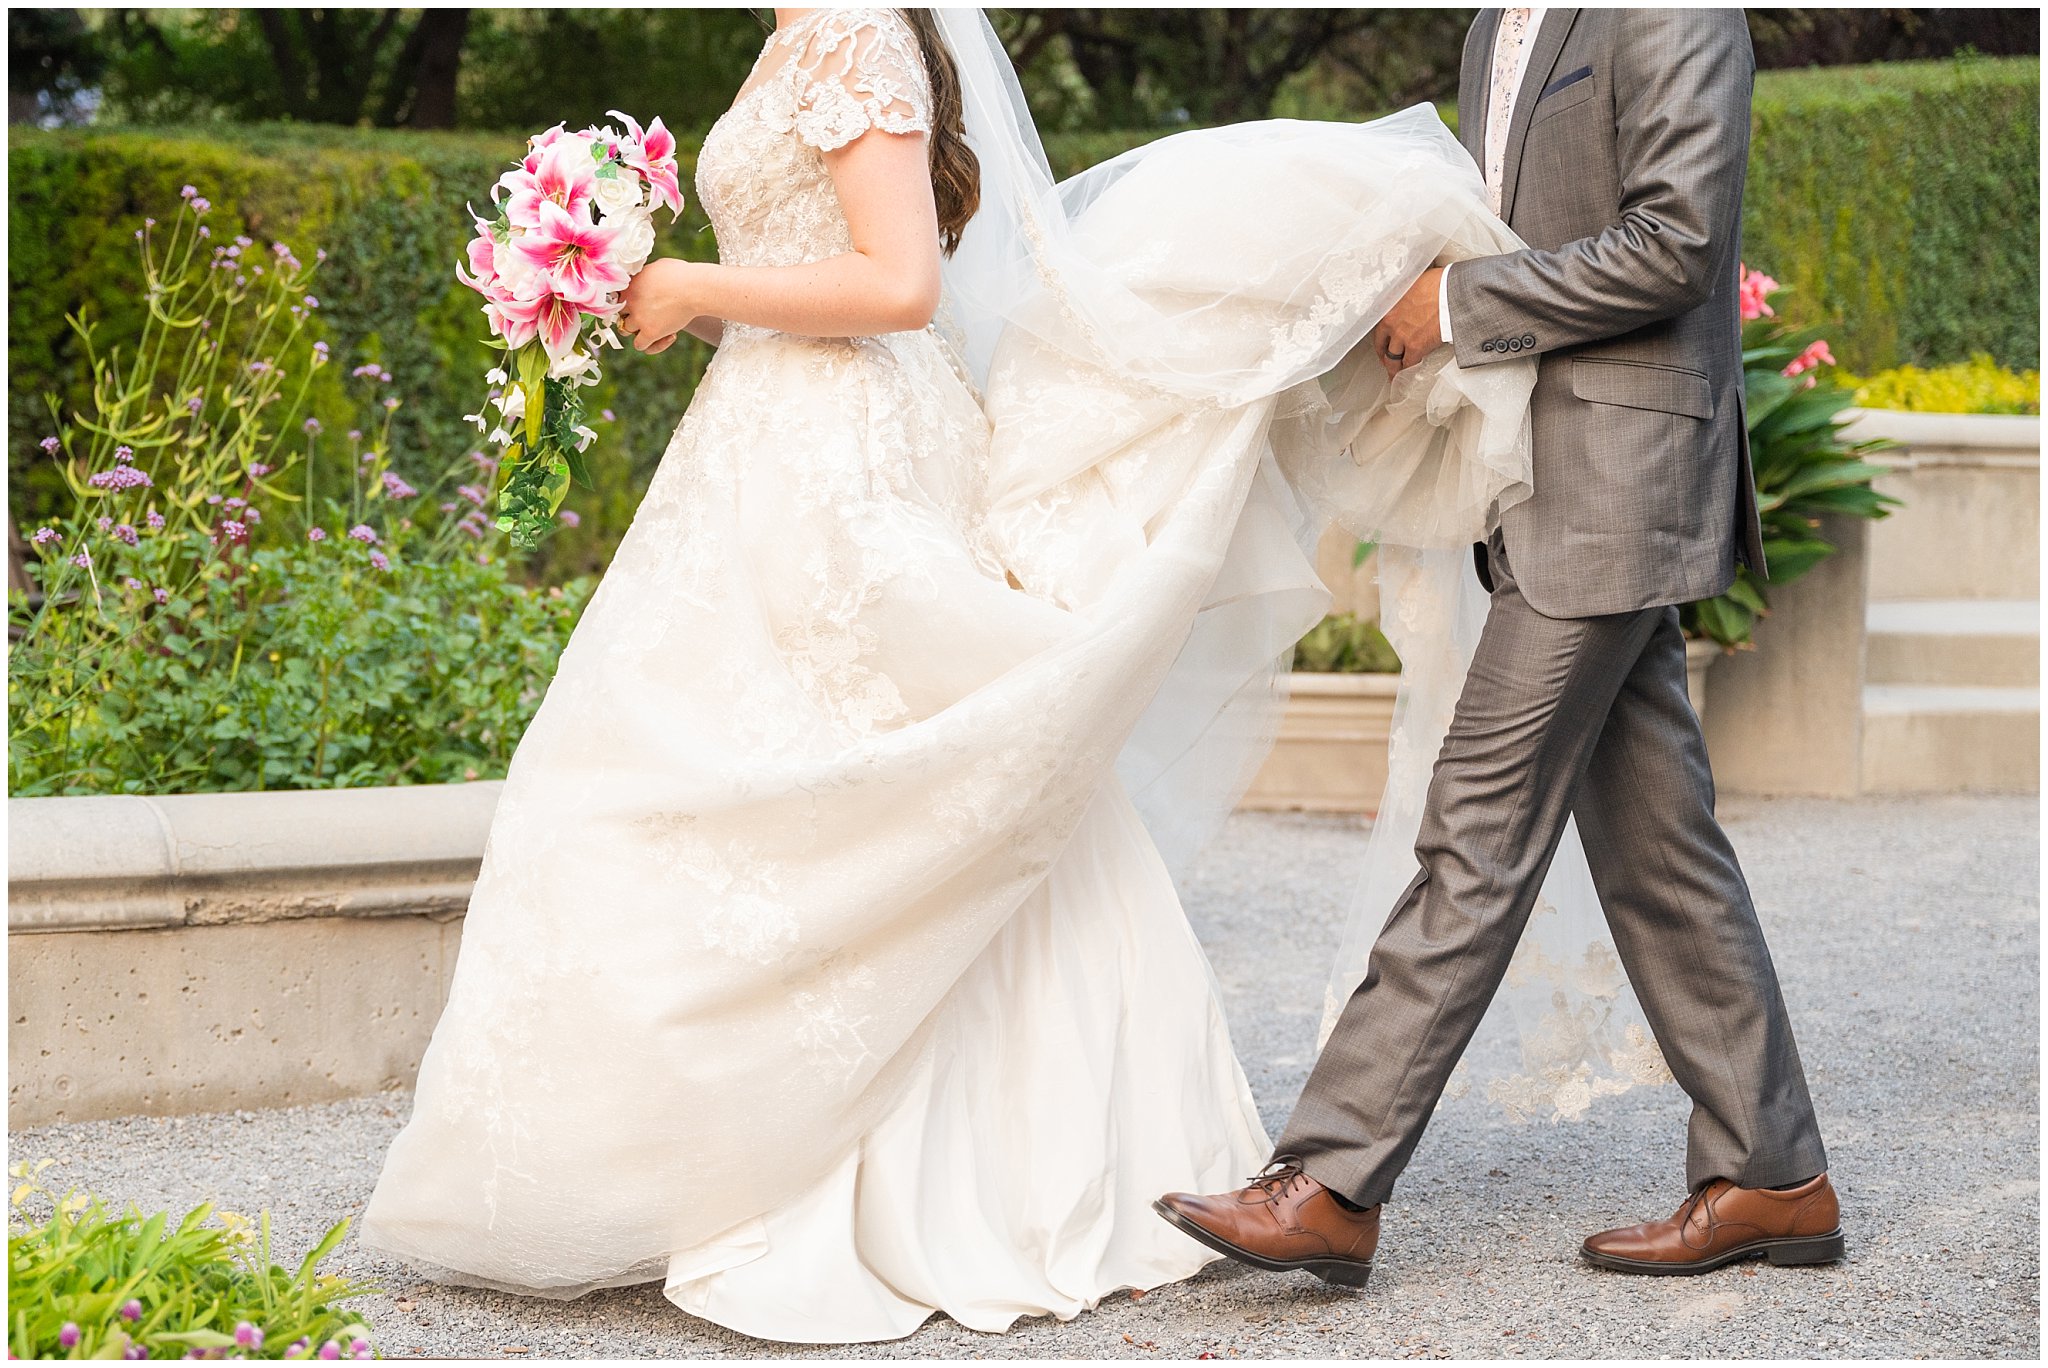 Bride and Groom details during wedding portraits during the summer surrounded by flowers and gardens | Thanksgiving Point Ashton Garden Formal Session | Jessie and Dallin Photography